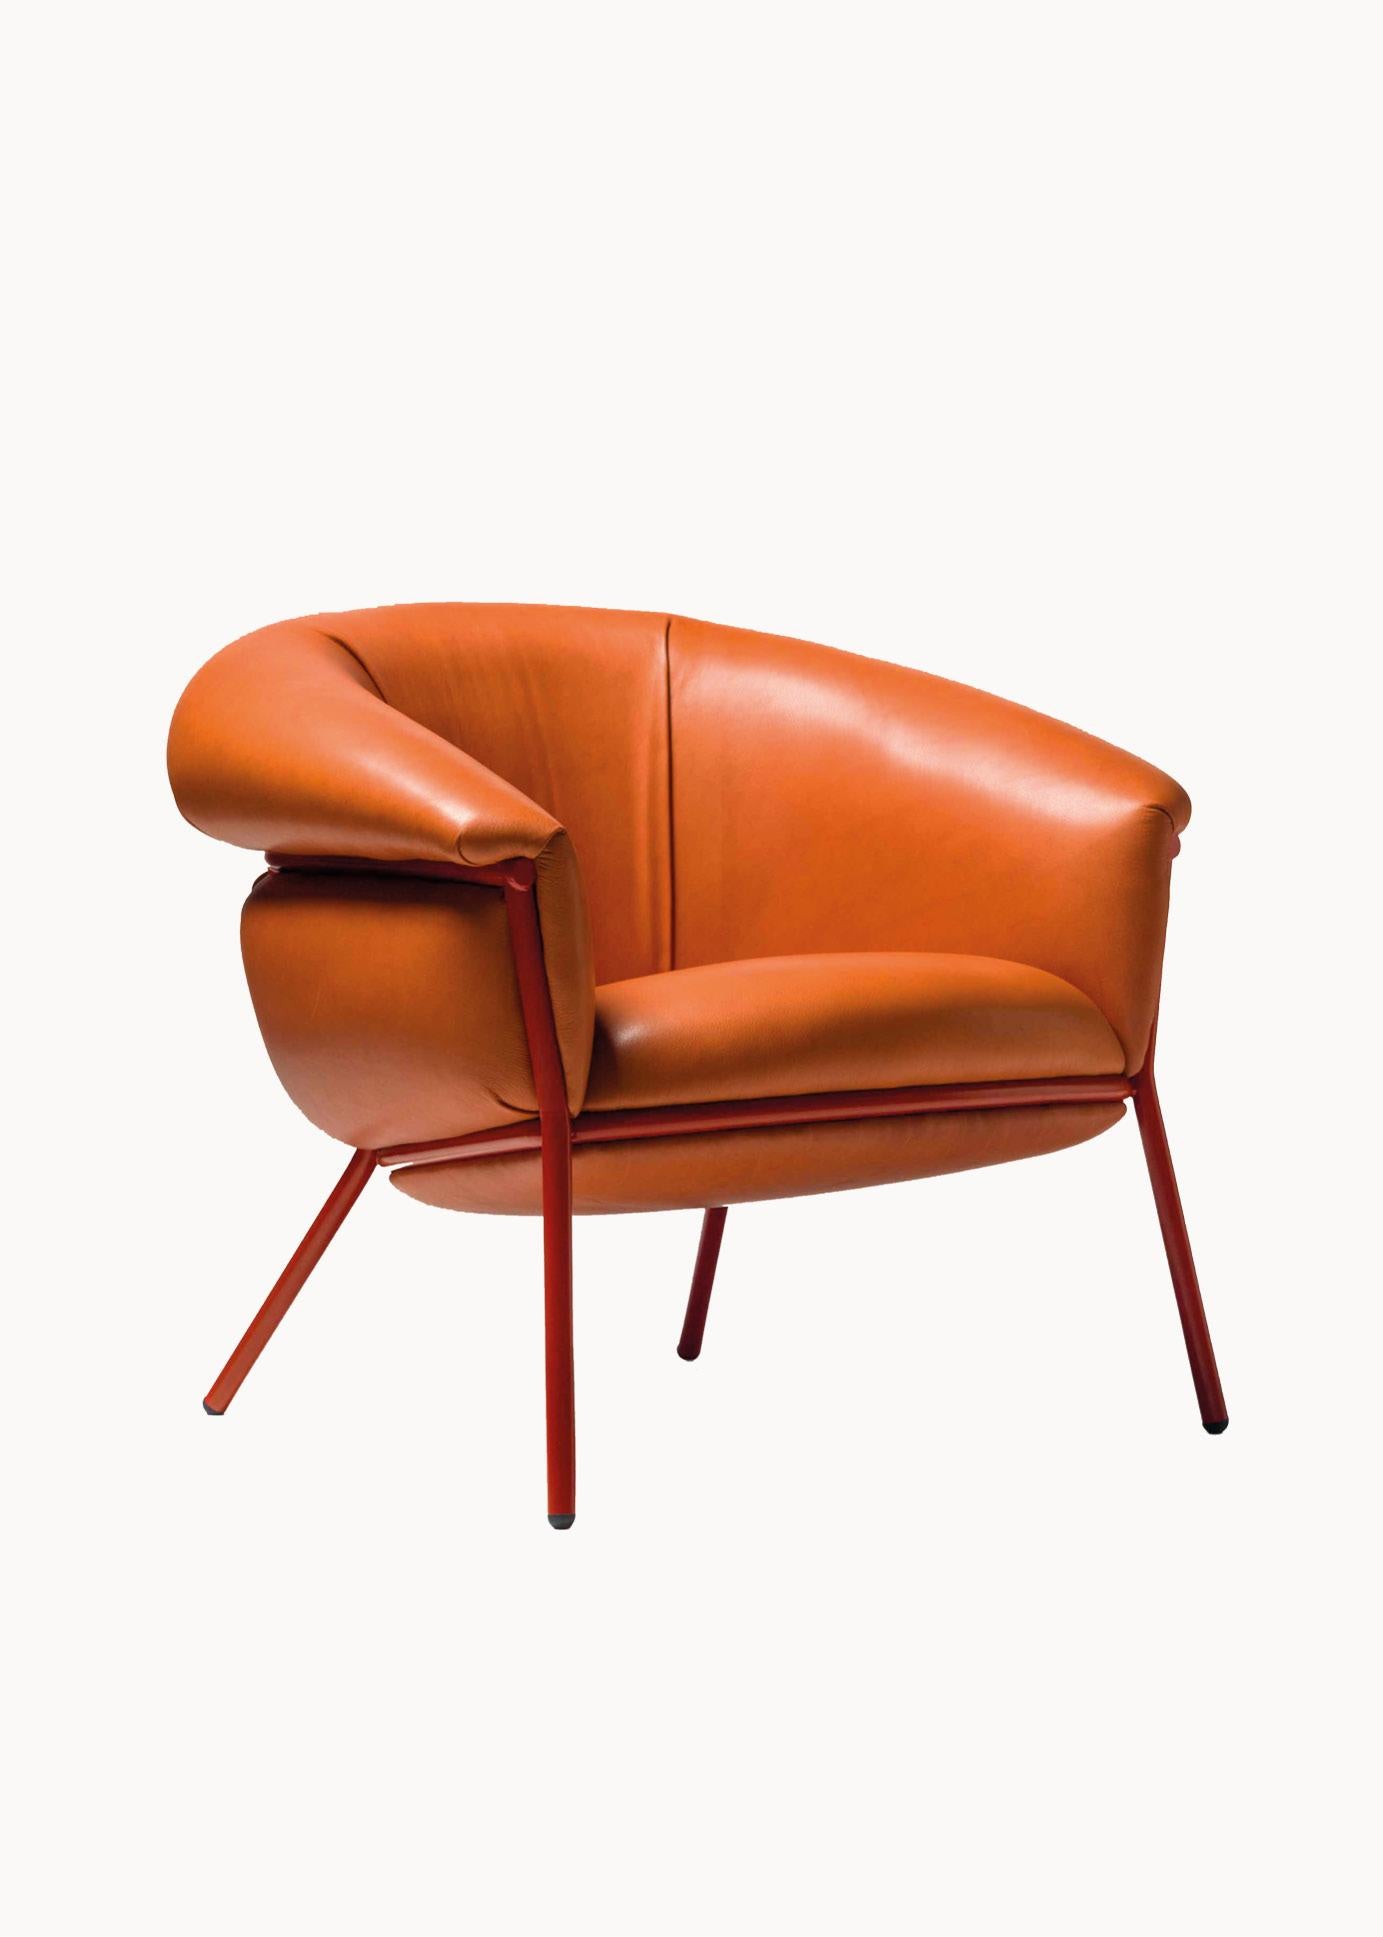 Modern Grasso armchair by Stephen Burks organge padded leather, painted red structure For Sale